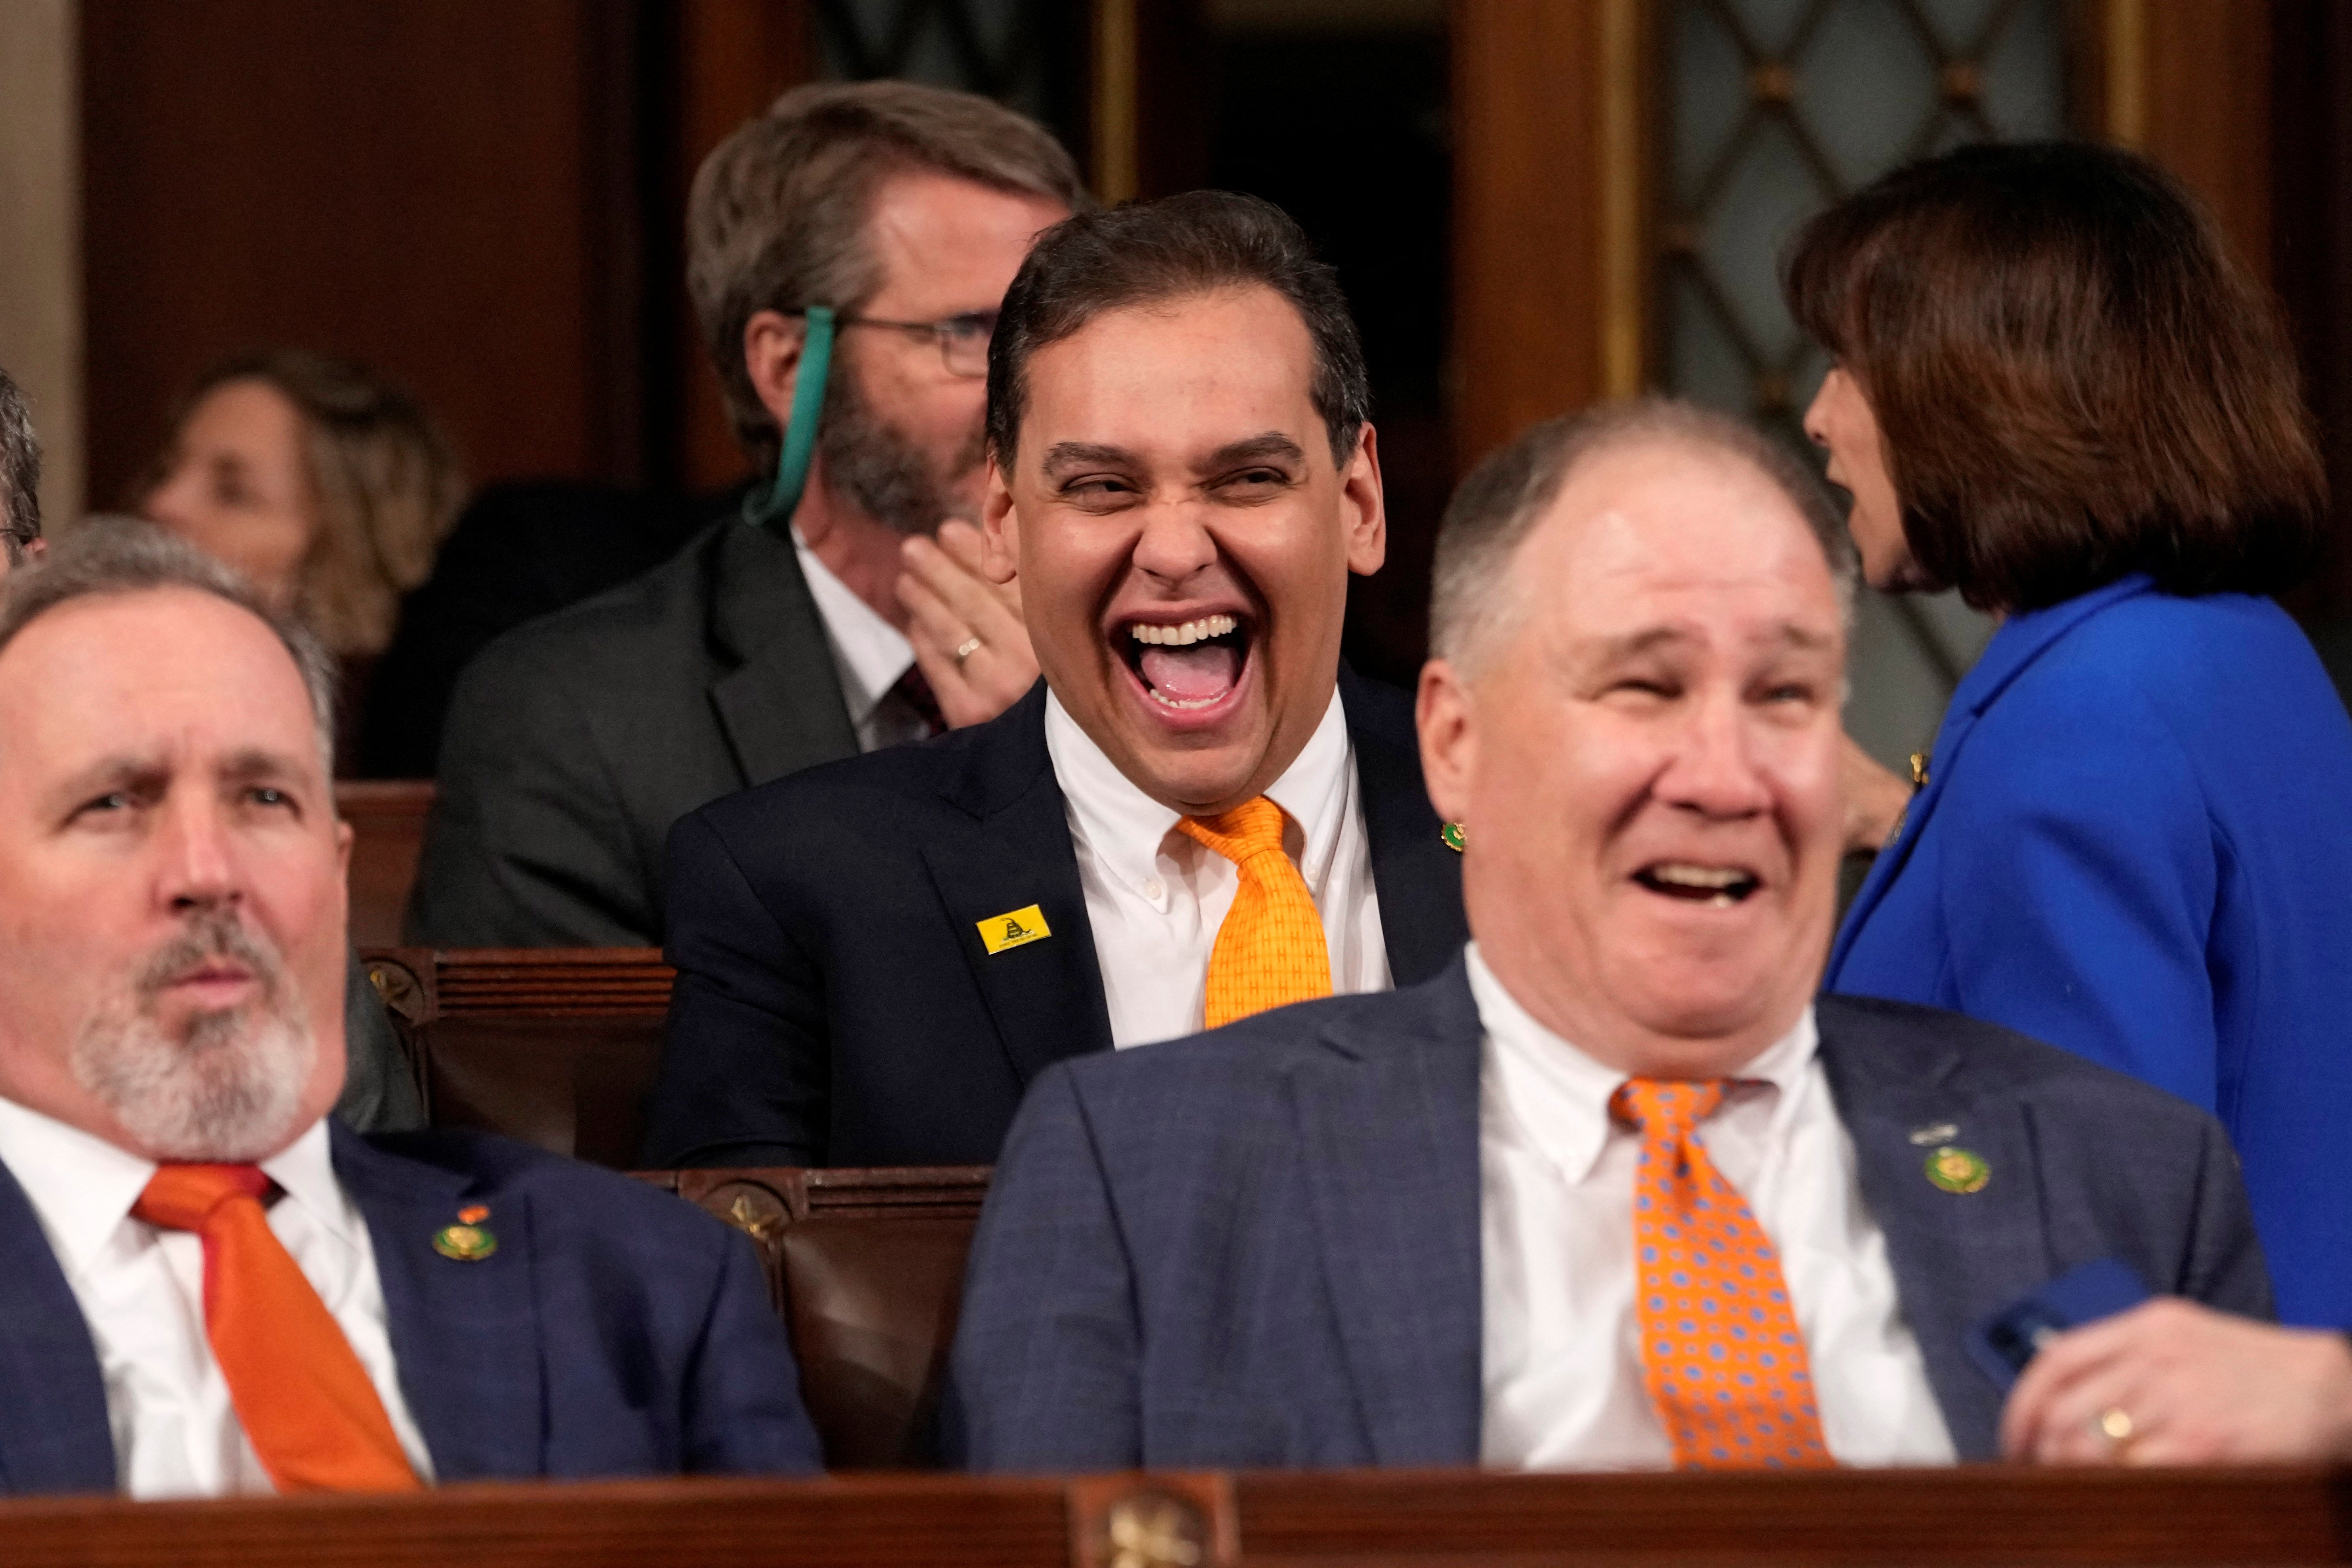 Rep. George Santos laughs before President Joe Biden delivers the State of the Union address